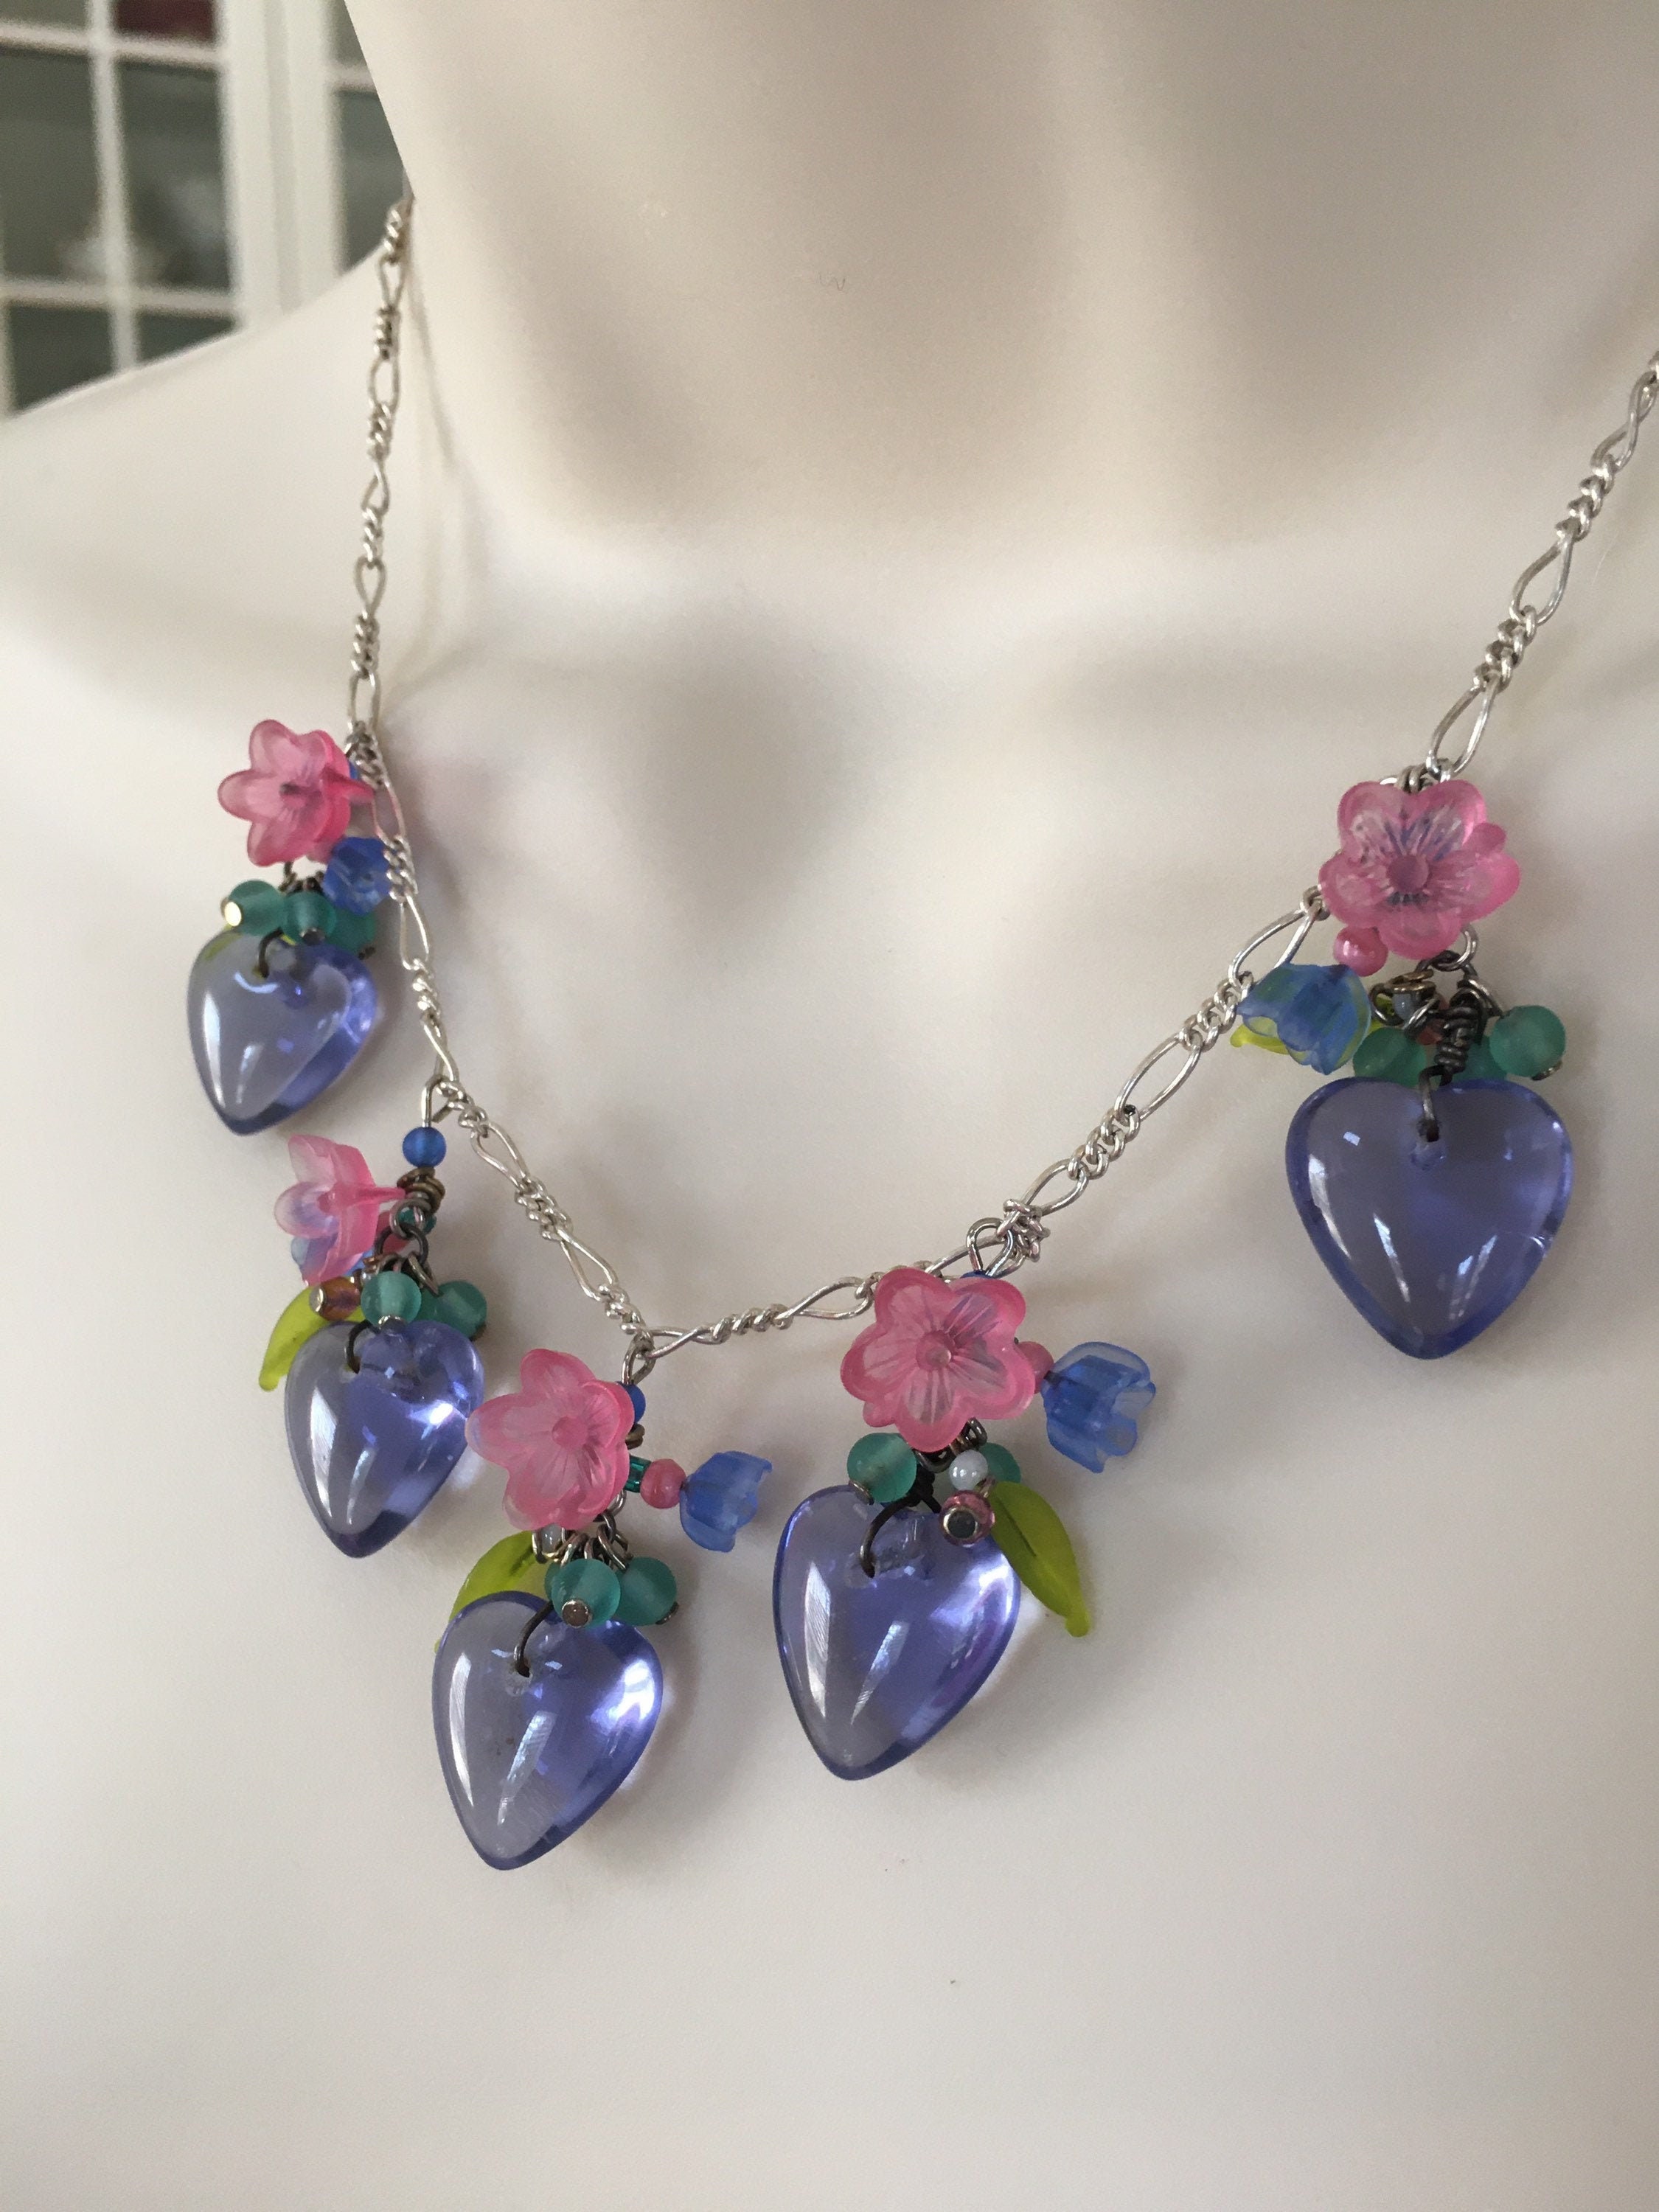 Vintage Czech Art Glass Necklace Selected by Anna Corinna | Free People